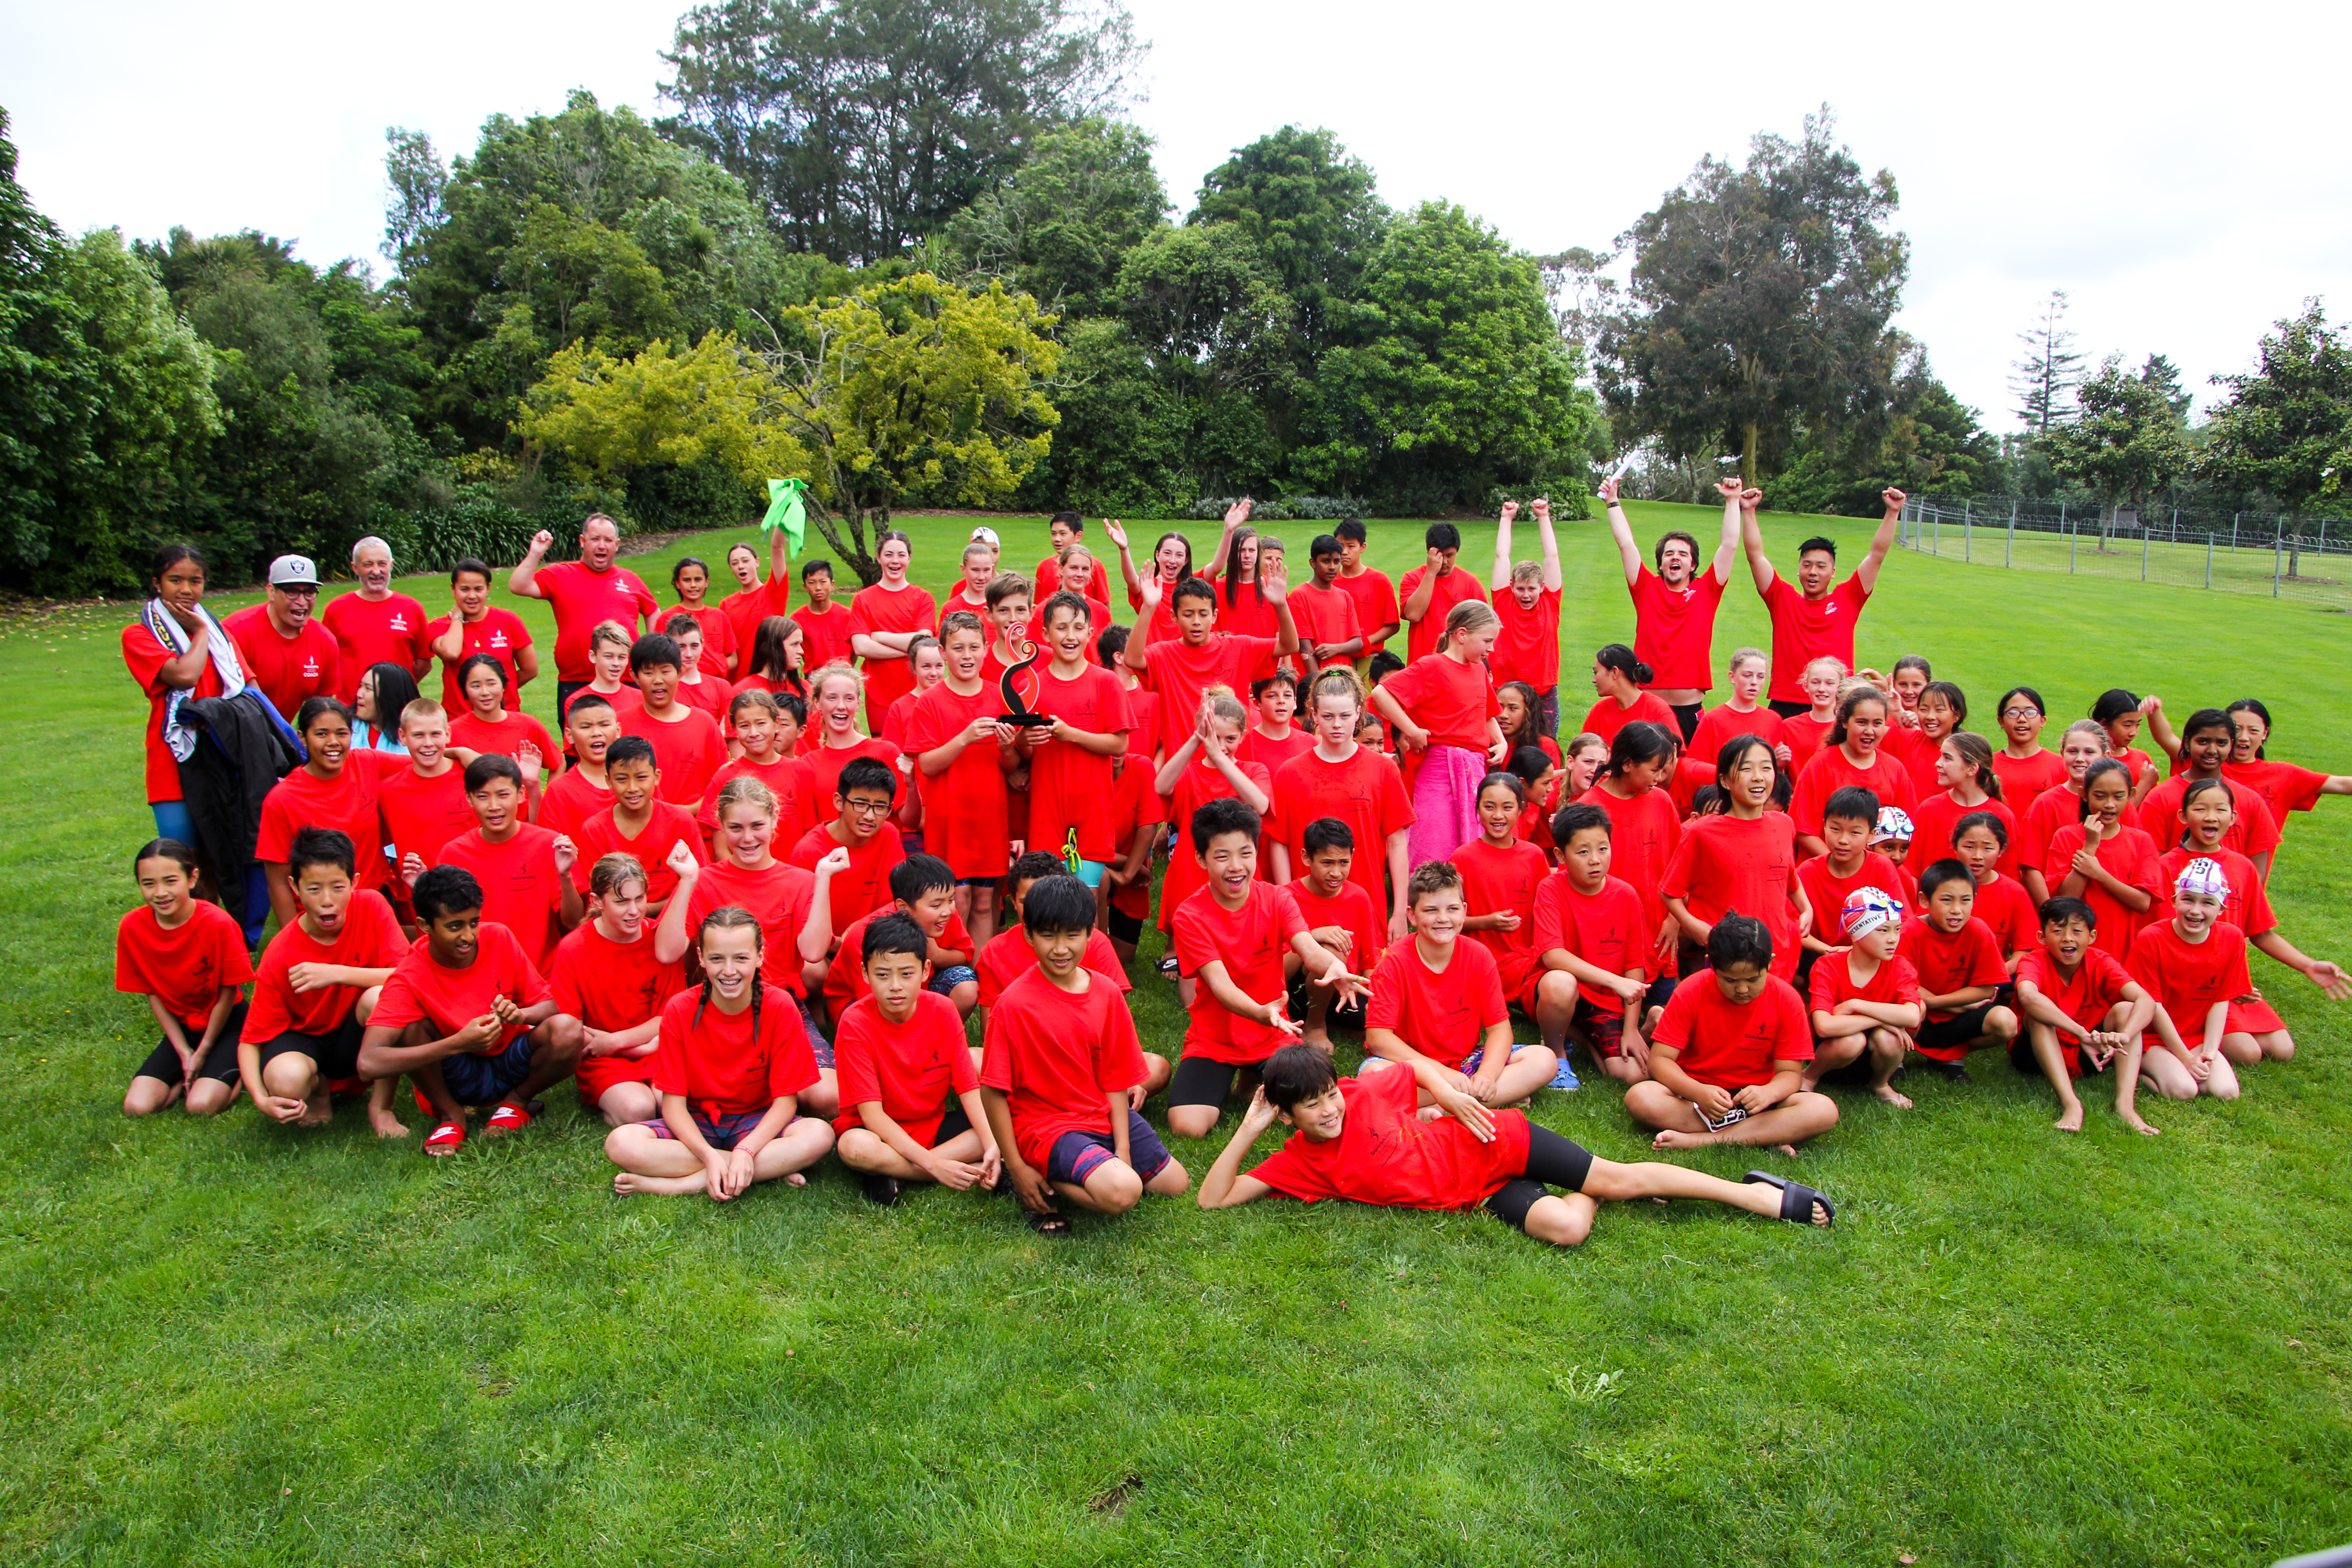 2020 Tainui Trophy win for Swimming Counties Manukau!